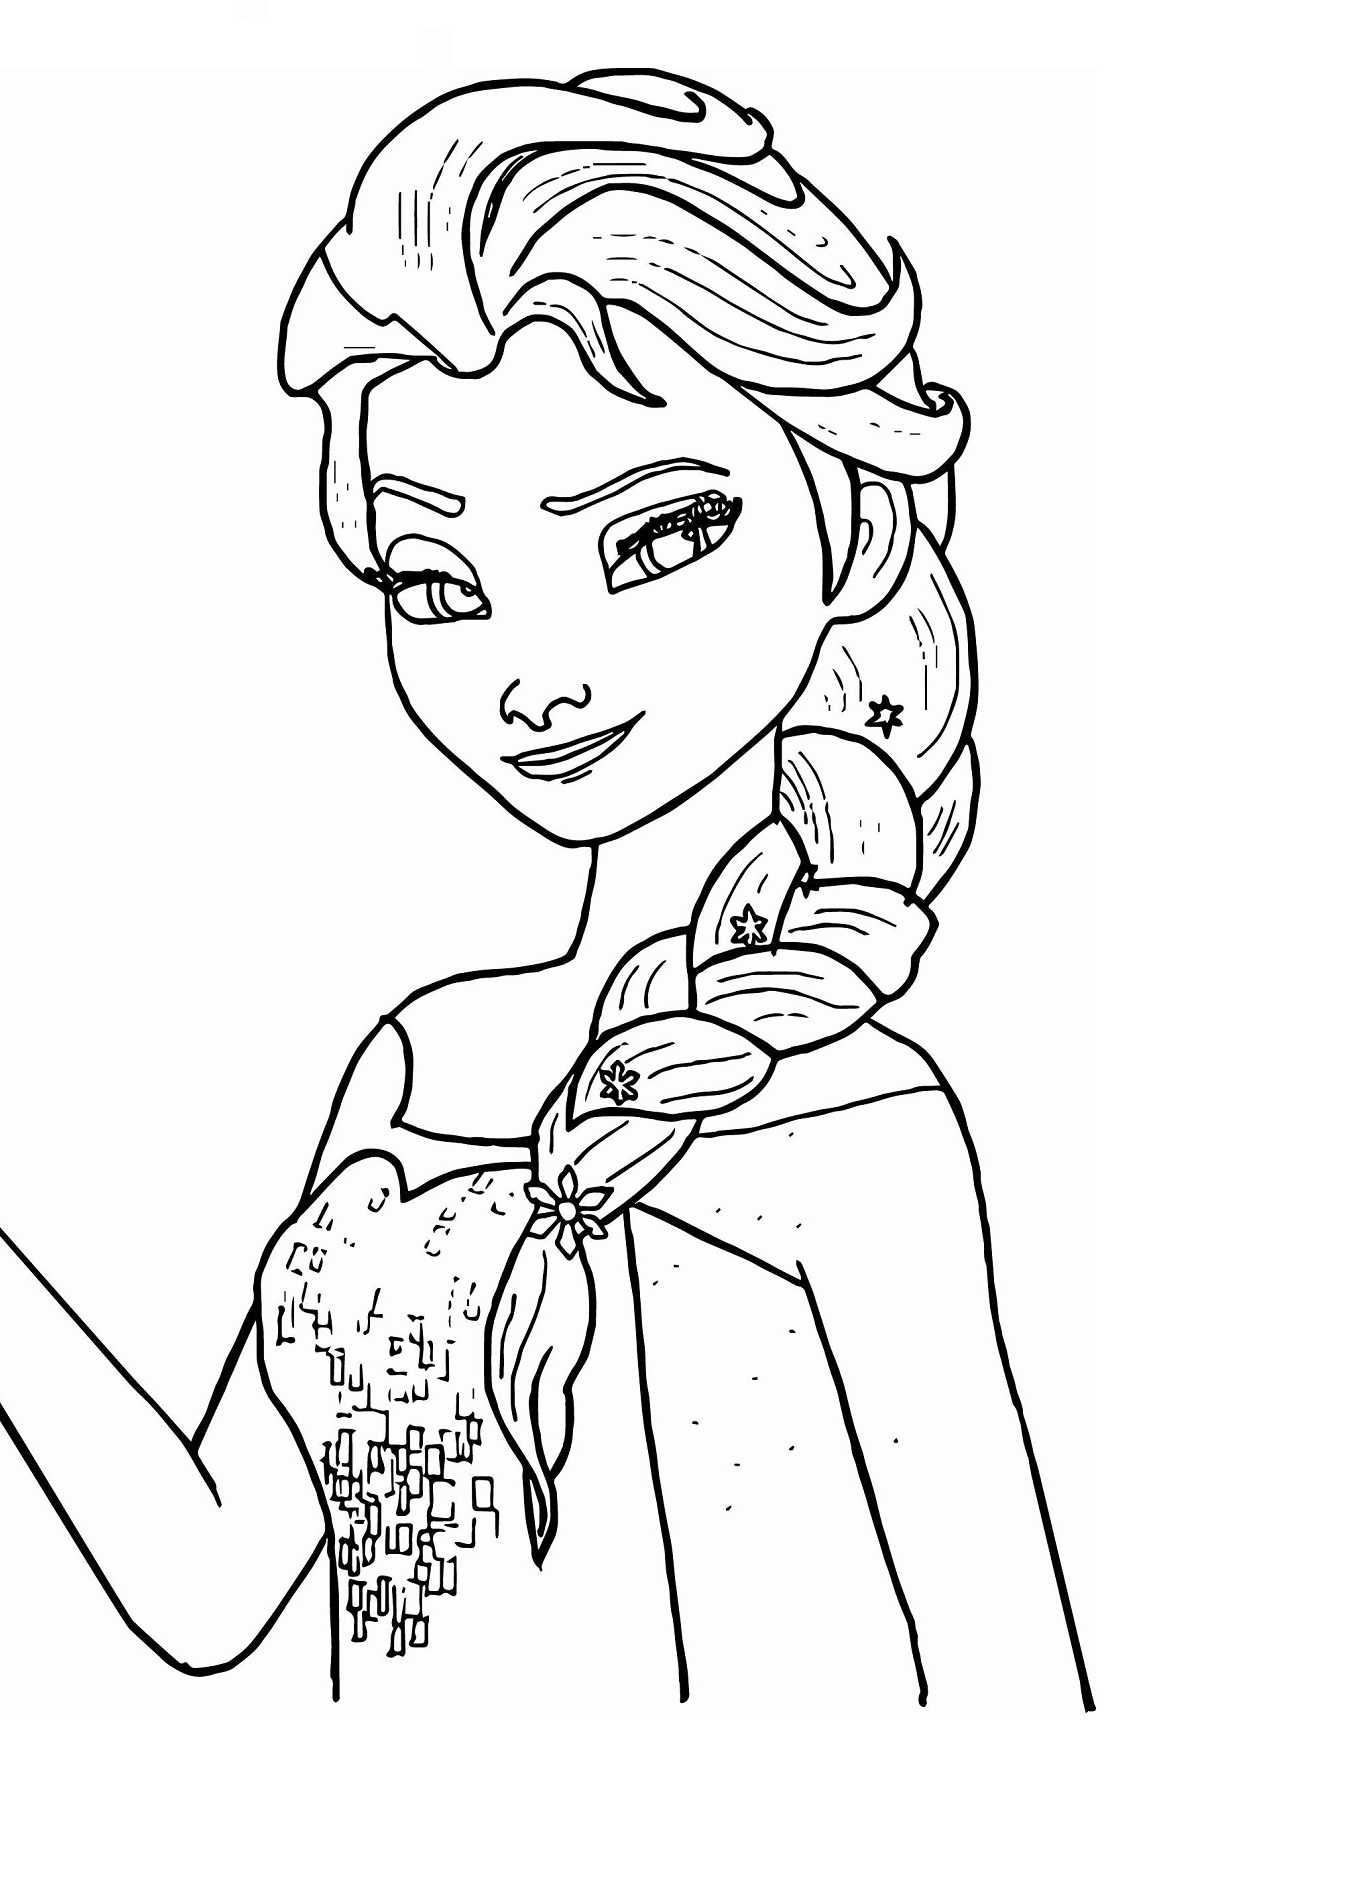 Printable Frozen seems angry Coloring Page for kids.